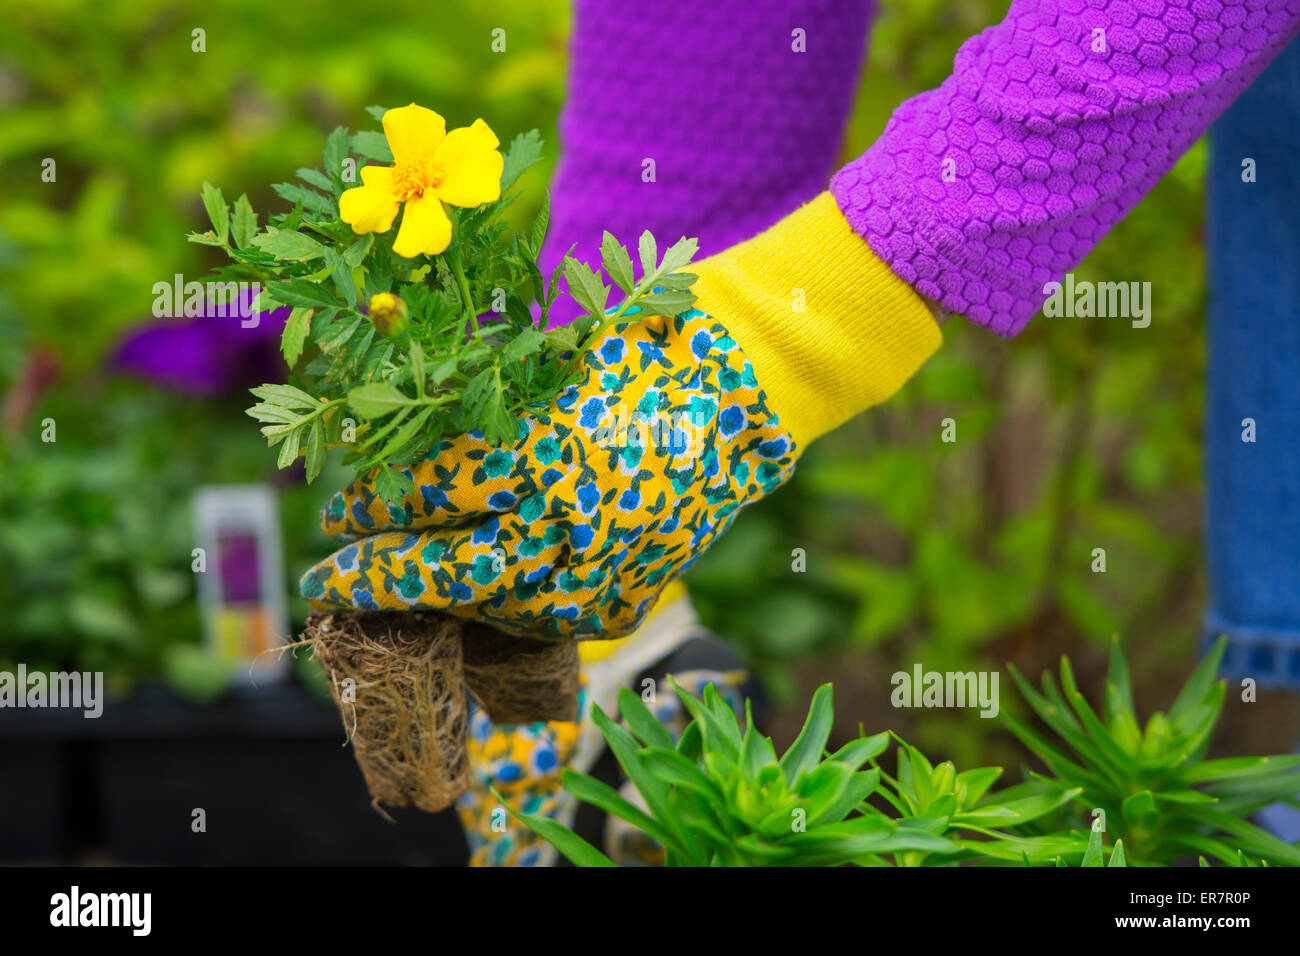 Gardening, Planting,  Flowers,  Woman holding flower plants to plant in garden, woman's hands in Gardening Gloves Stock Photo